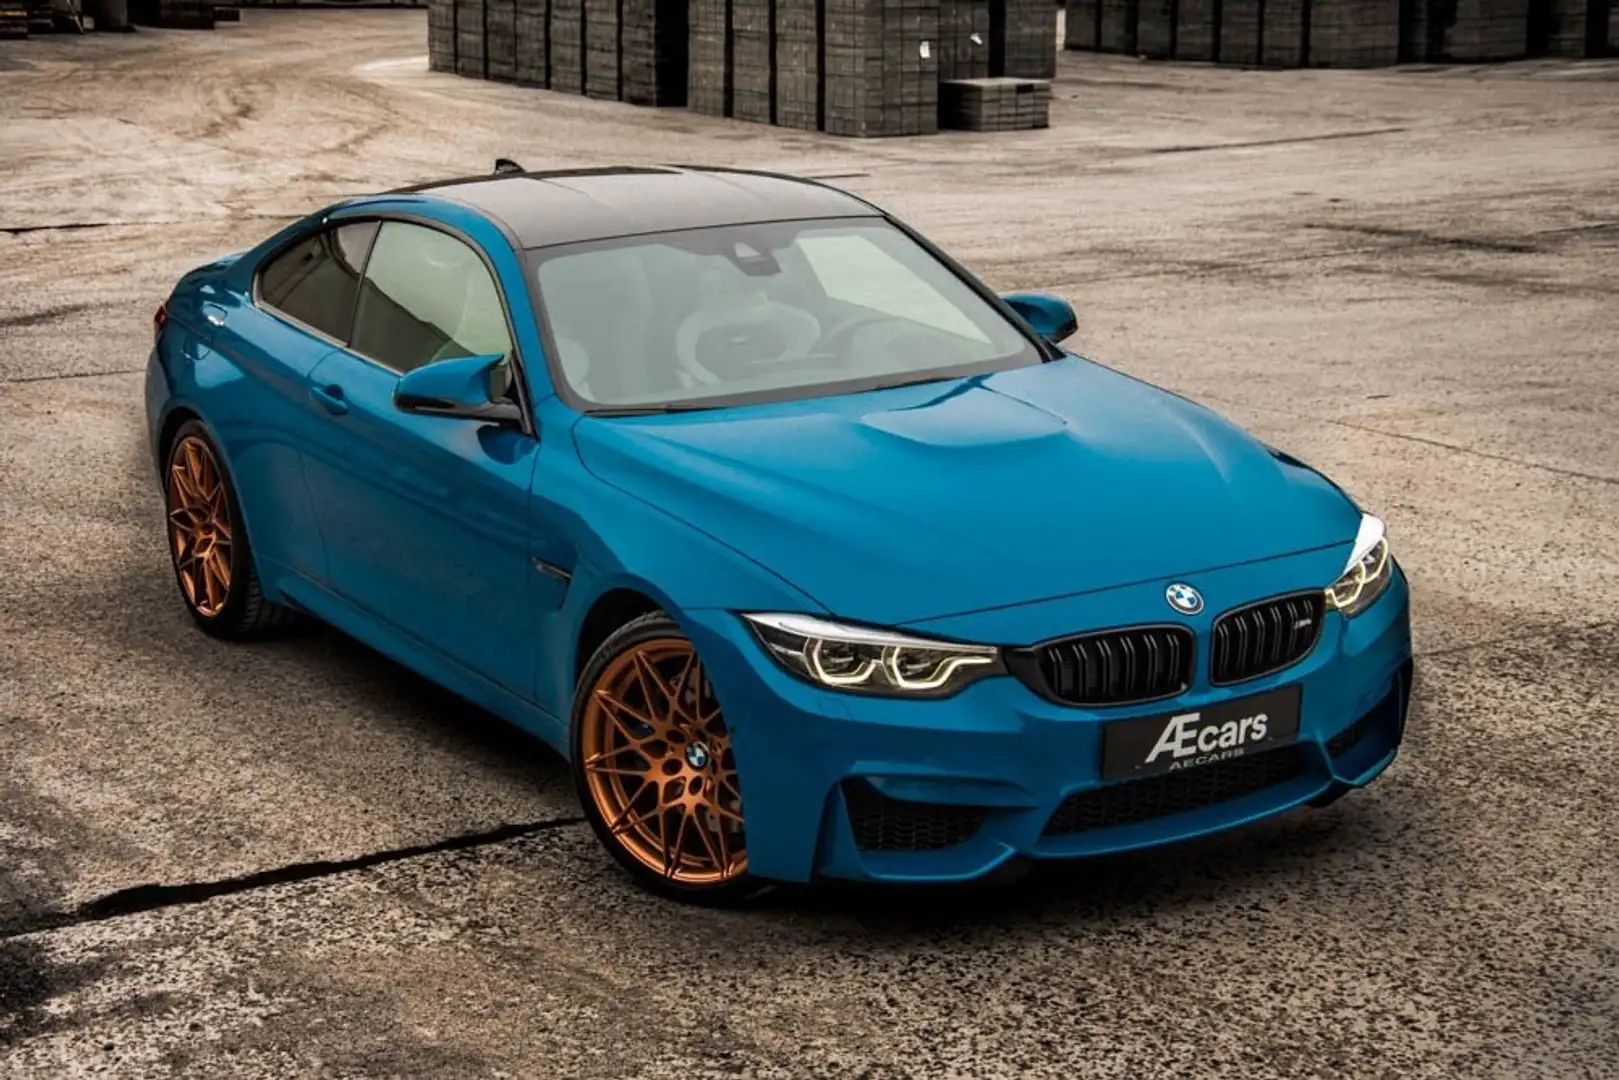 BMW M4 *** COMPETITION HERITAGE / LIMITED 1 OF 750 *** Mavi - 2